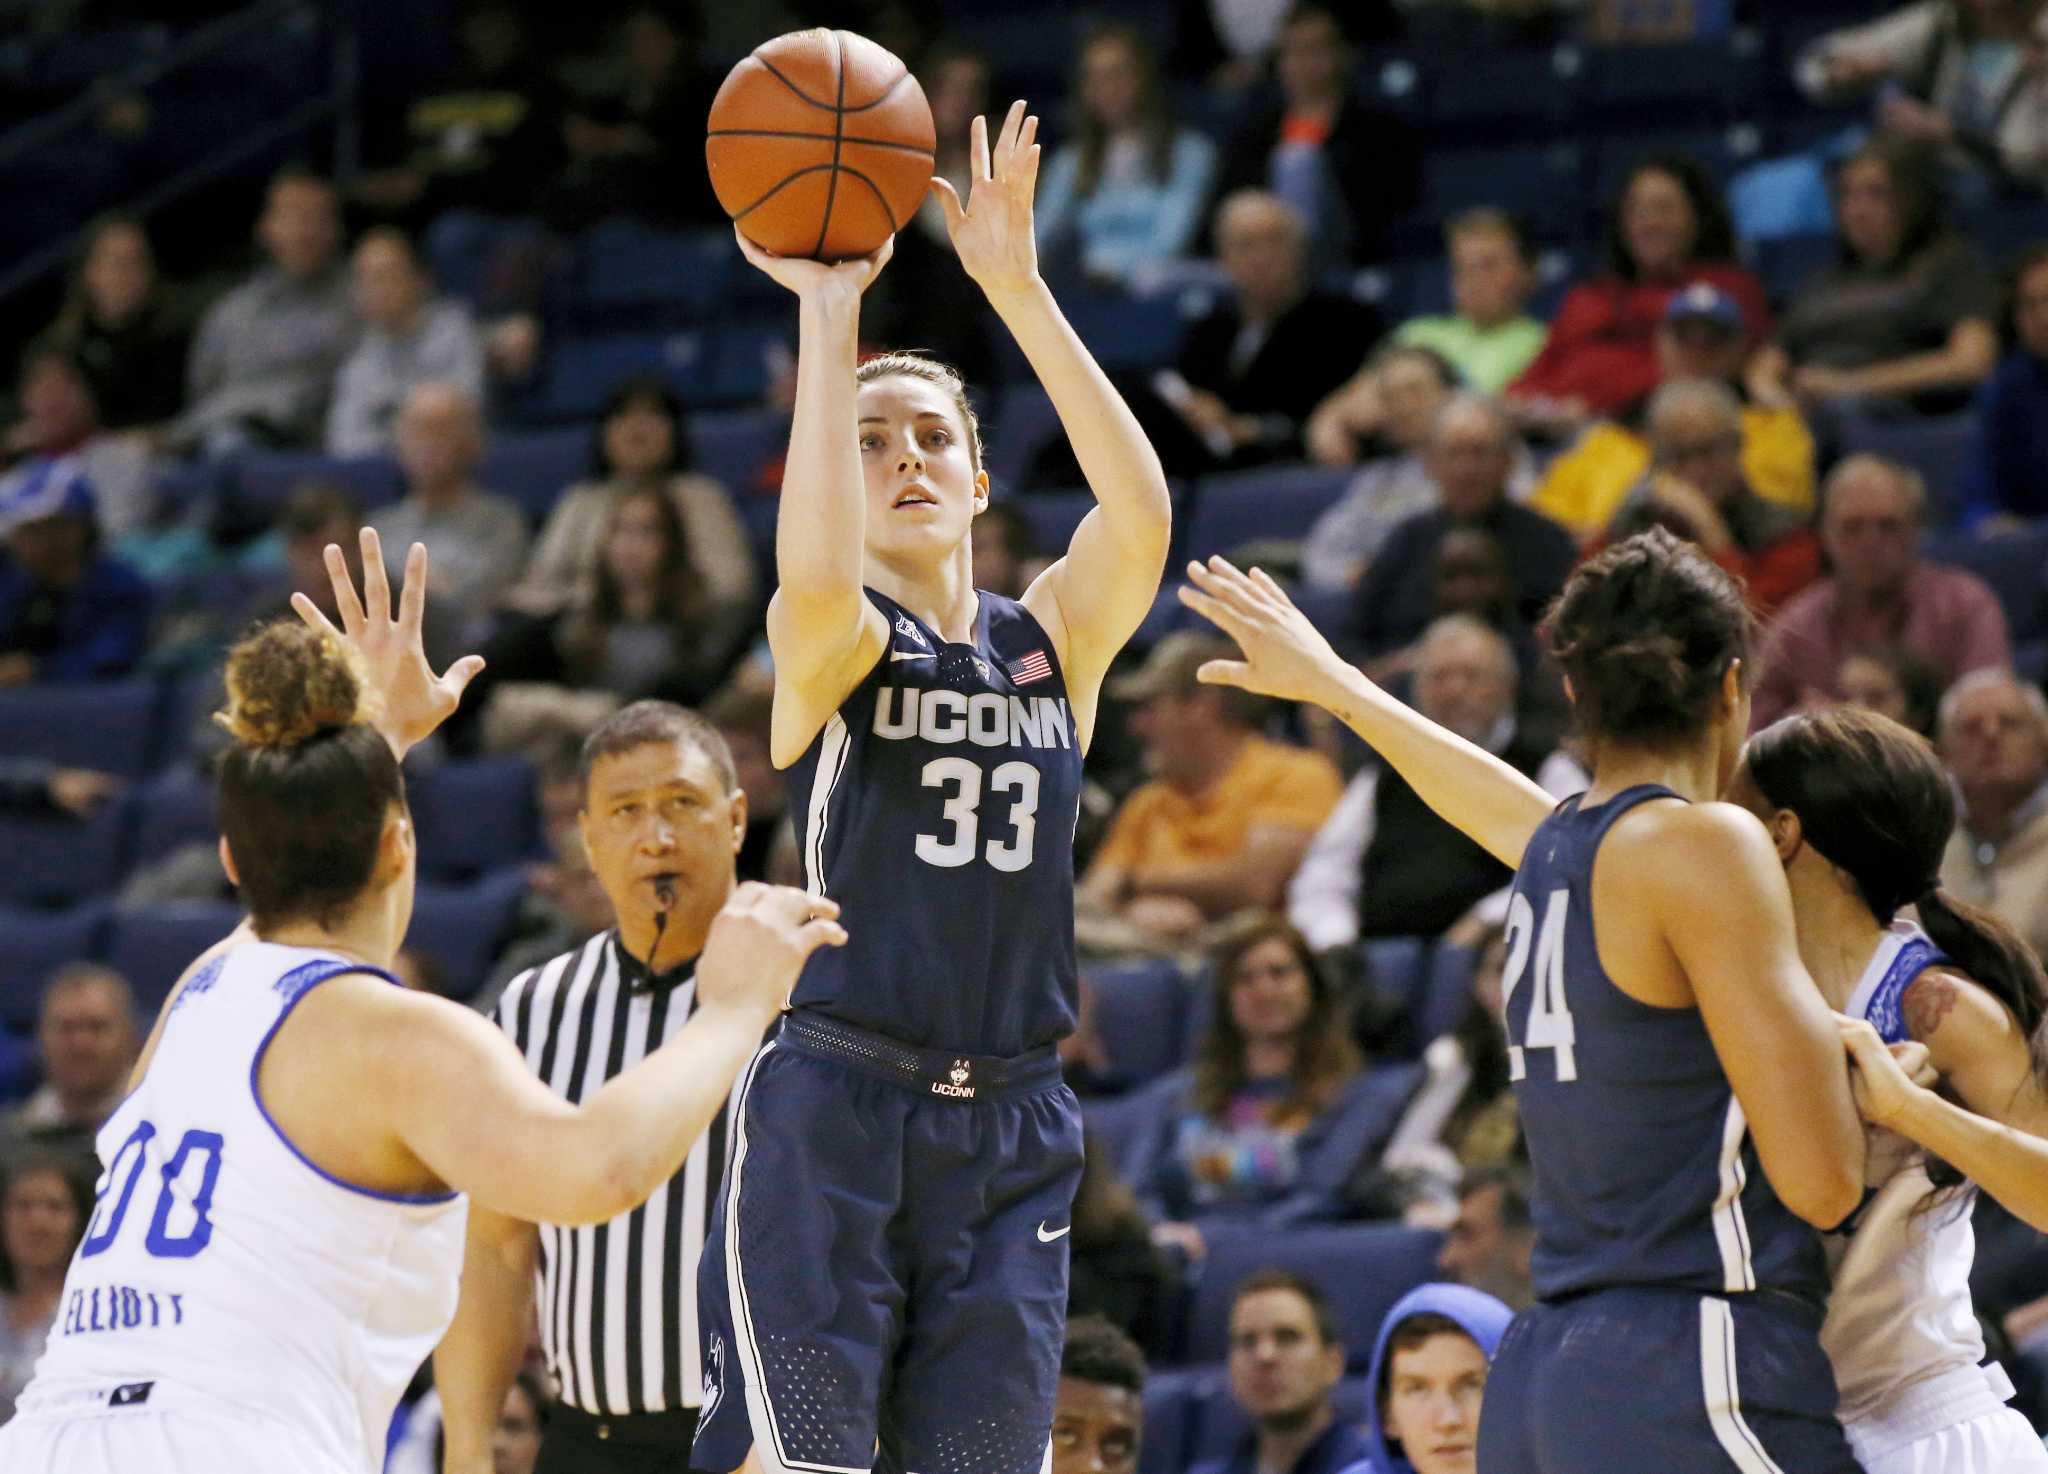 Katie Lou Samuelson thriving as UConn’s goto offensive player